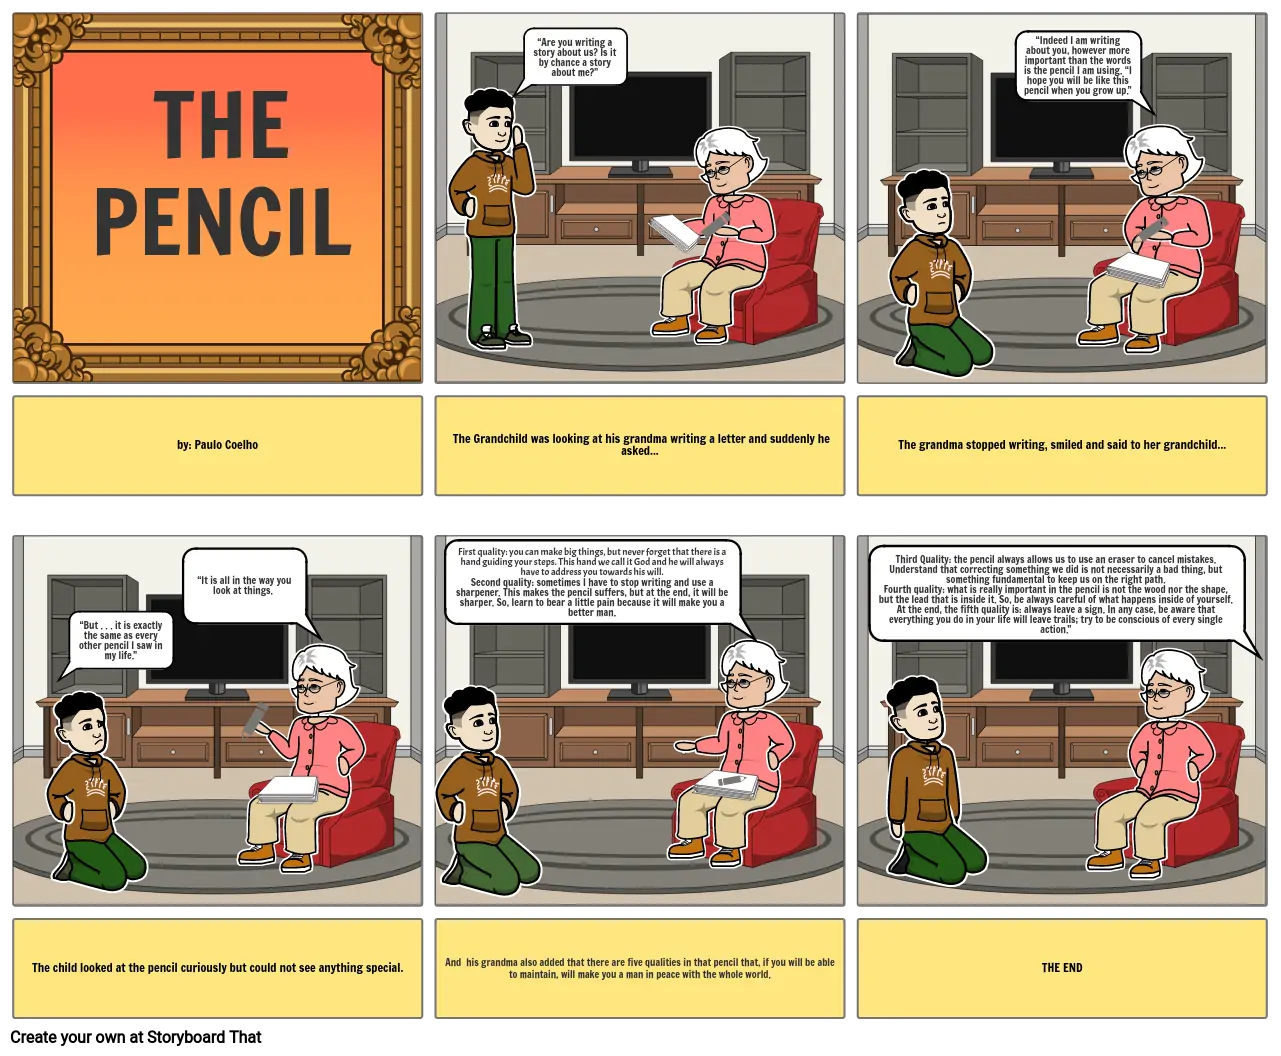 THE STORY OF THE PENCIL